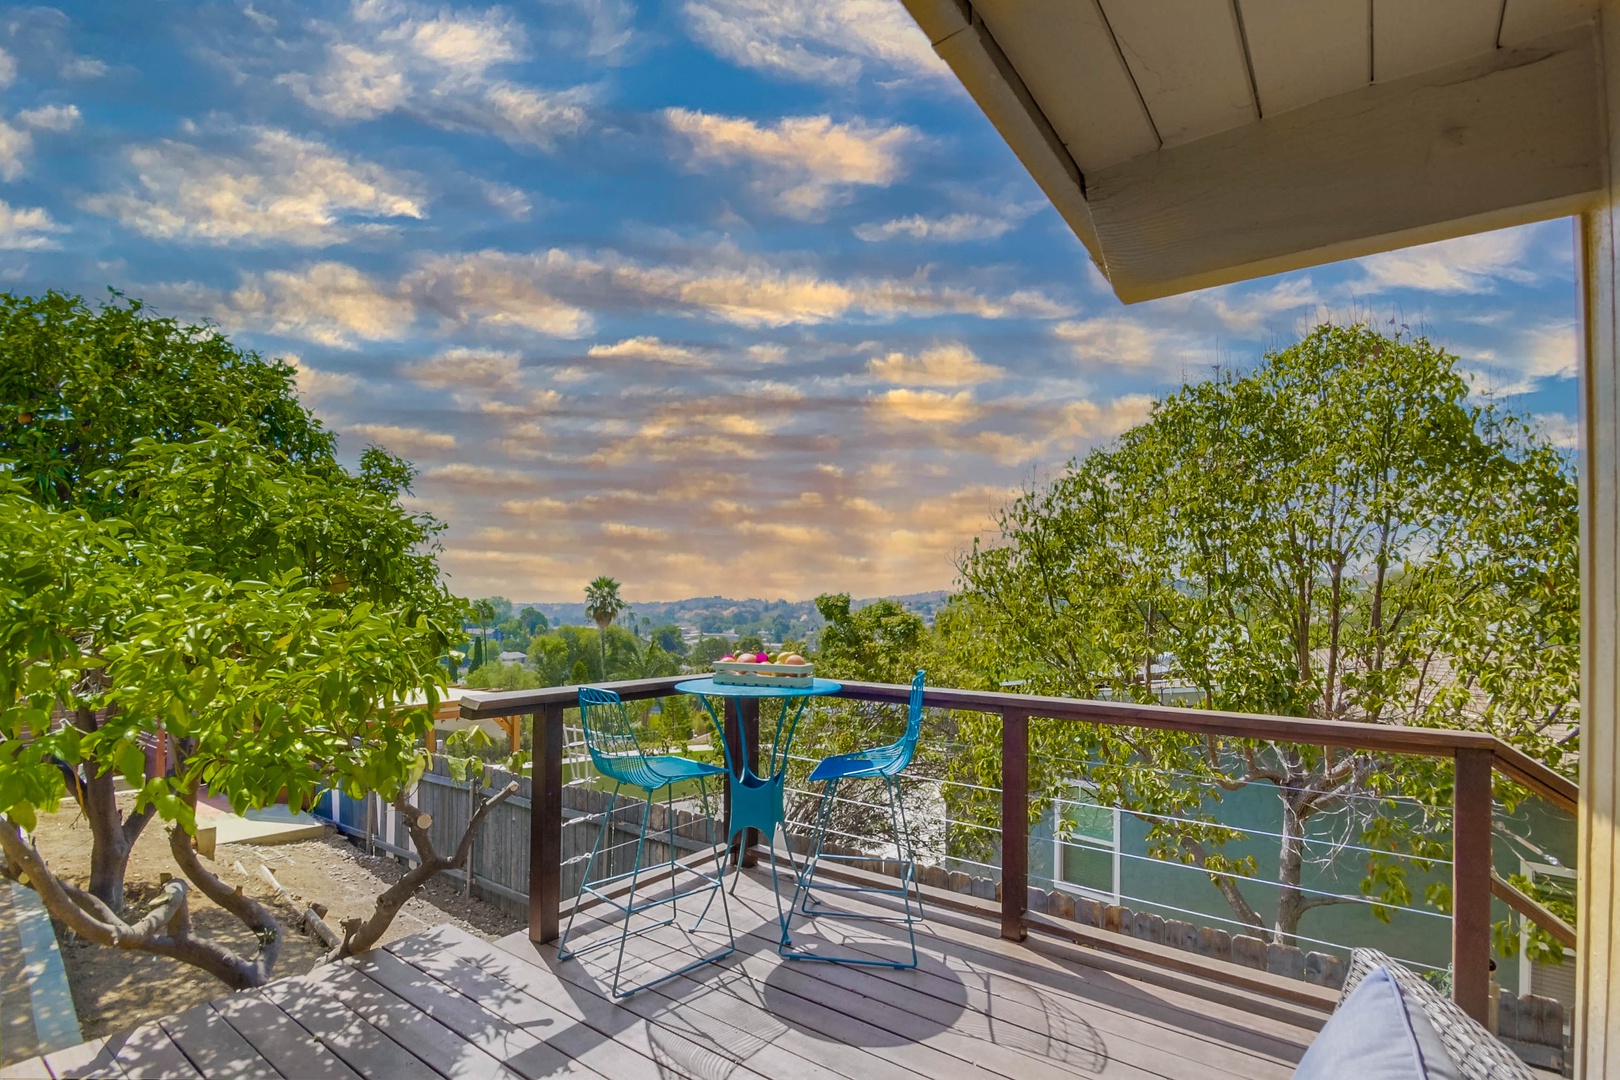 Private deck with views overlooking Mount Helix